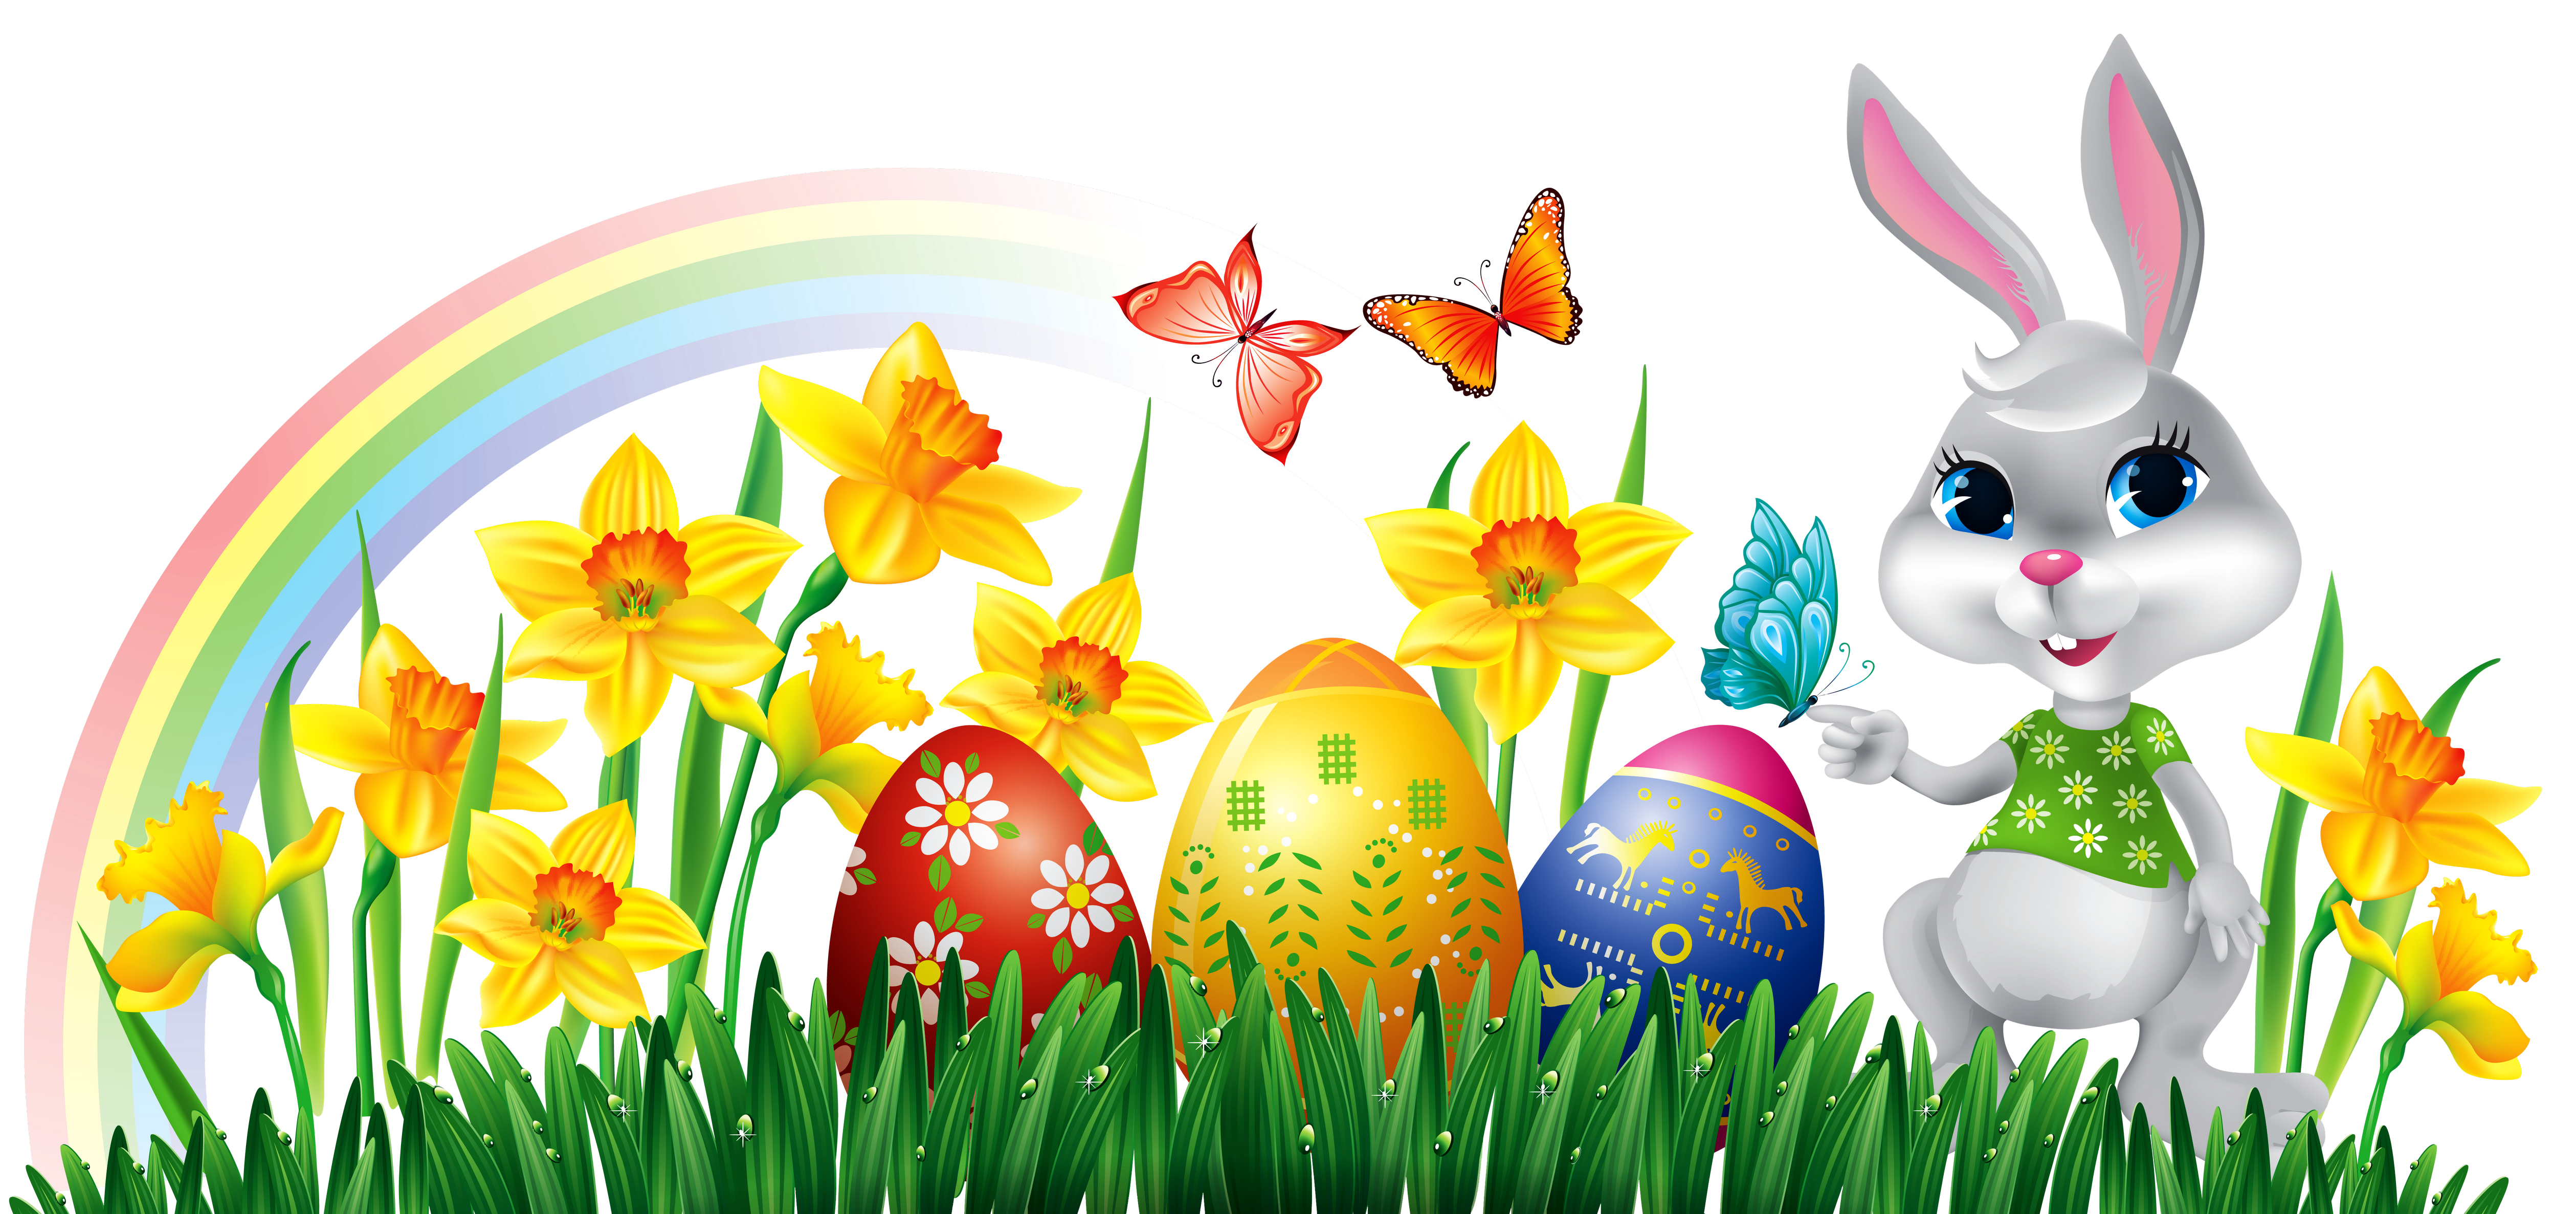 Daffodil clipart grass. Easter bunny with daffodils